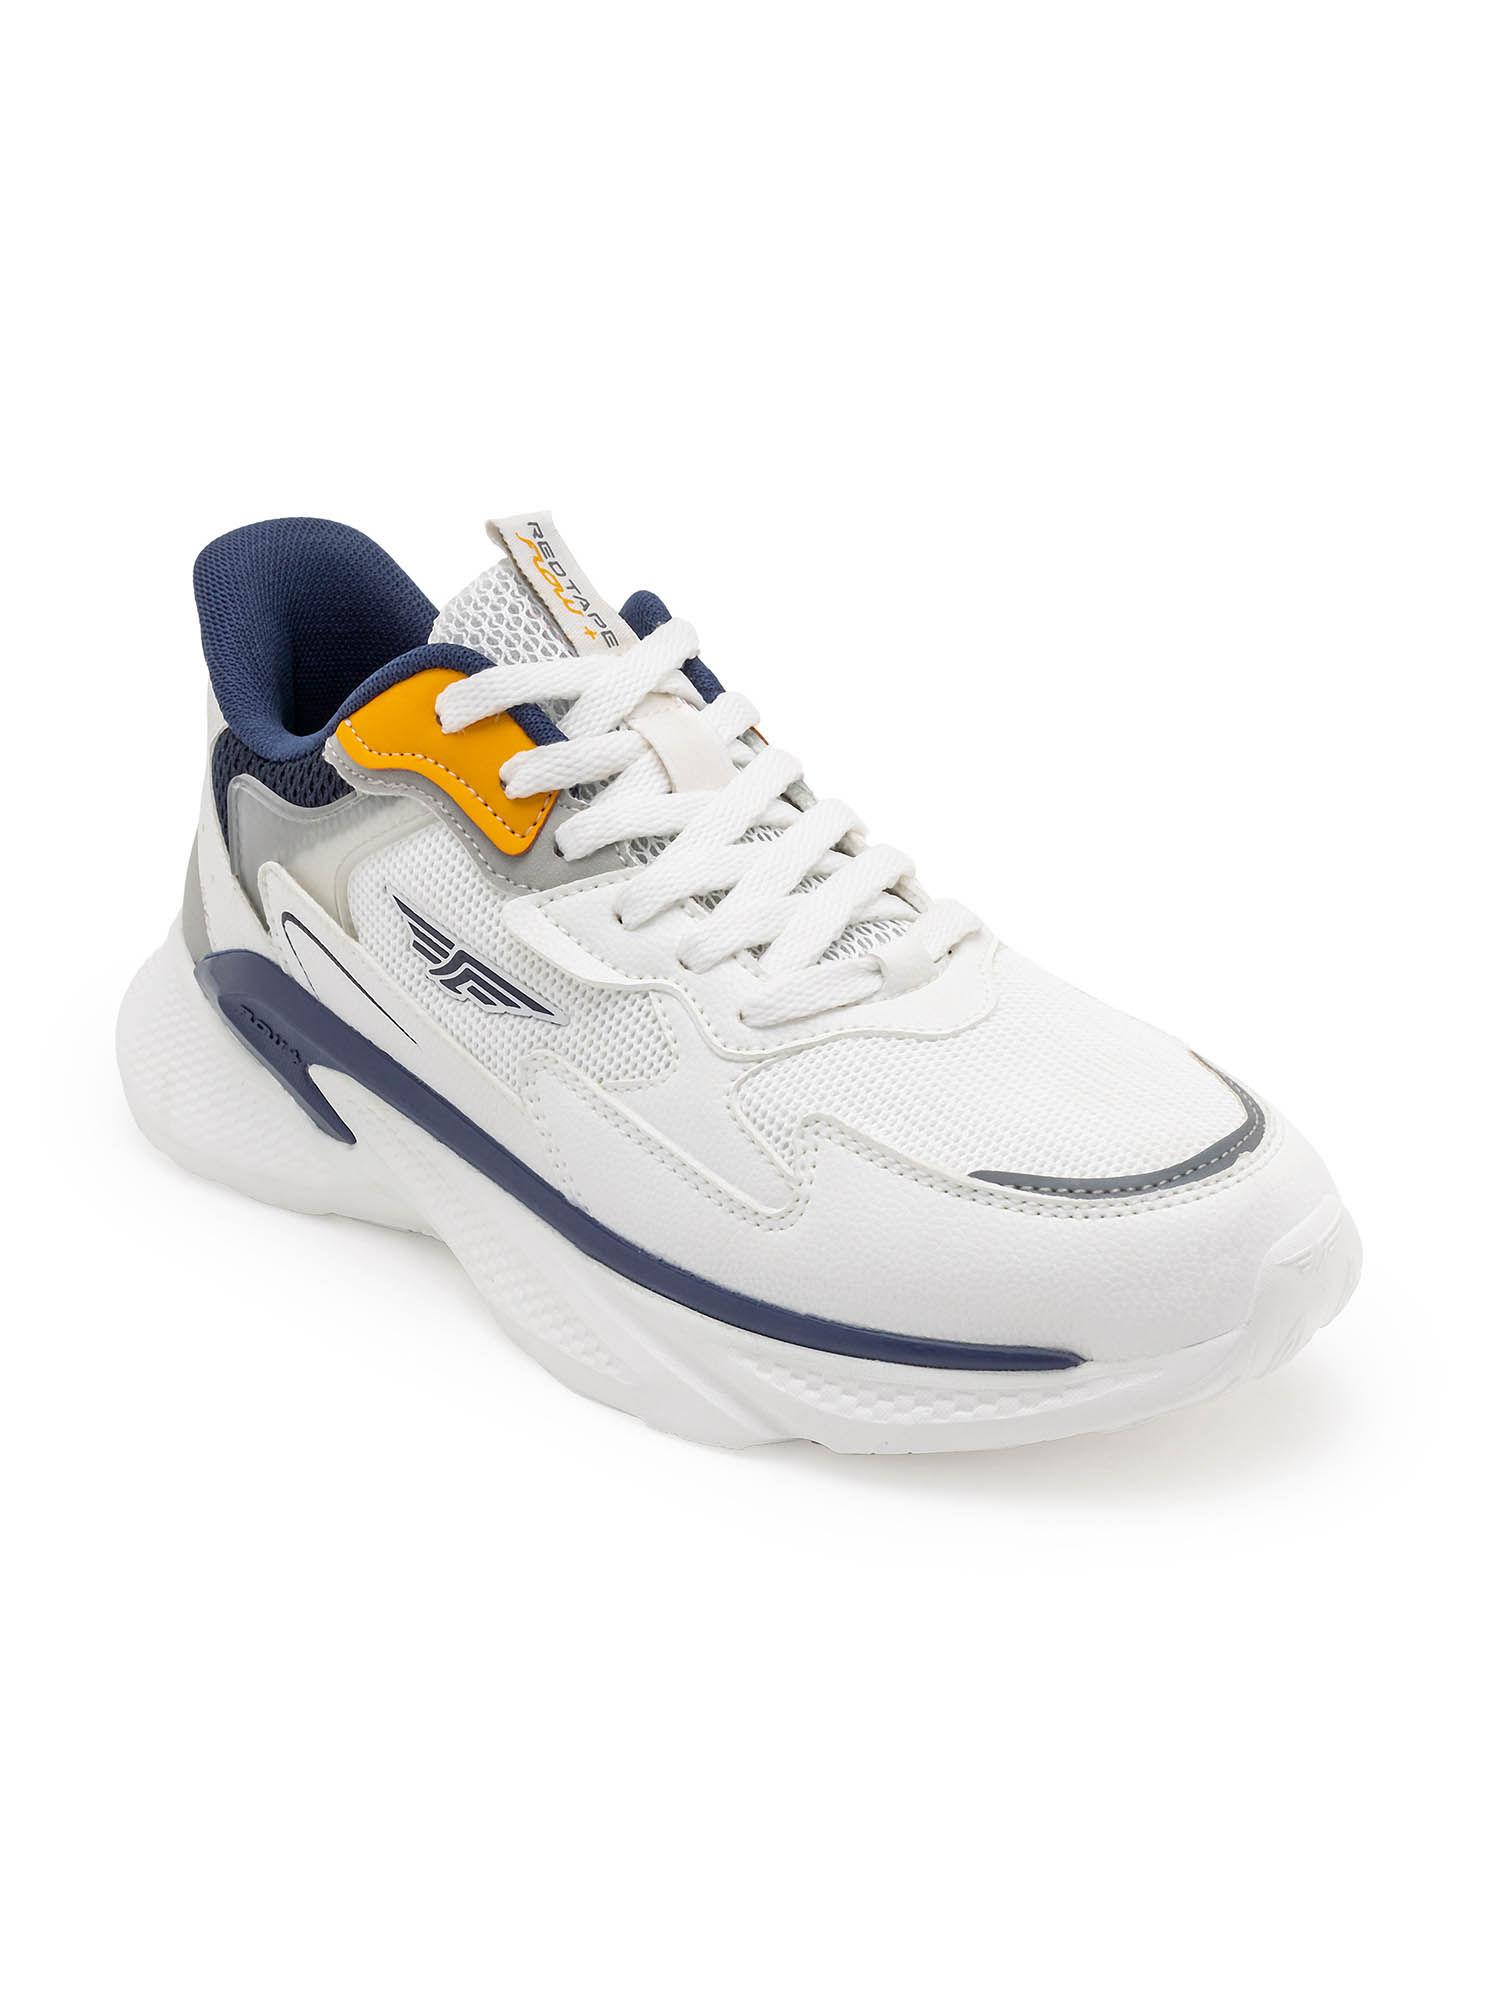 mens textured white walking shoes